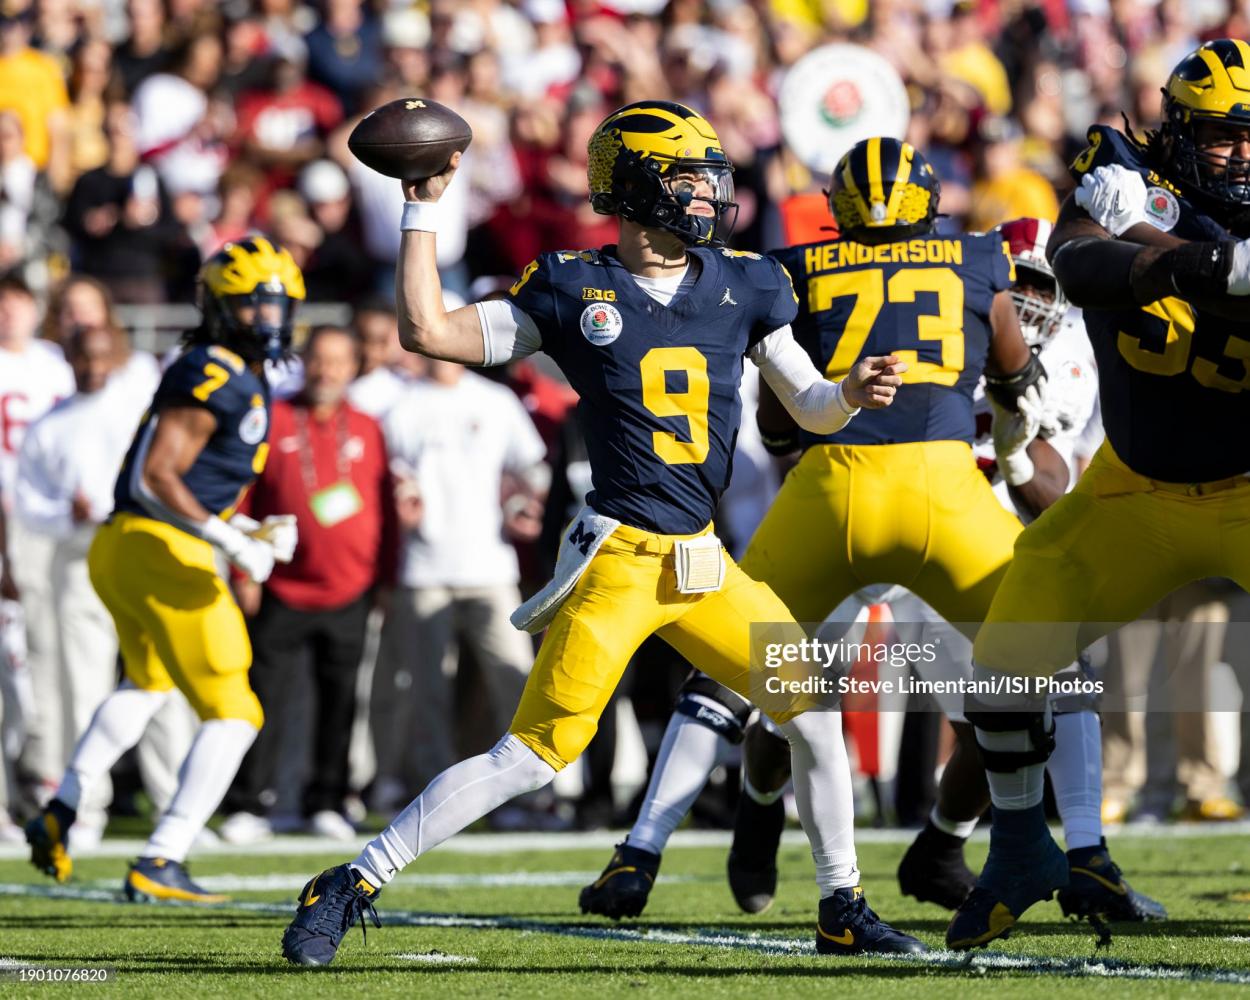 J.J.McCarthy #9 of the Michigan Wolverines passes the ball during the <strong><a  data-cke-saved-href='https://www.vavel.com/en-us/ncaa/2015/12/23/college-football/582453-to-claim-or-not-to-claim-should-universities-claim-national-titles-awarded-or-not.html' href='https://www.vavel.com/en-us/ncaa/2015/12/23/college-football/582453-to-claim-or-not-to-claim-should-universities-claim-national-titles-awarded-or-not.html'>Rose Bowl</a></strong> during a game between University of Alabama and University of Michigan at the <strong><a  data-cke-saved-href='https://www.vavel.com/en-us/ncaa/2015/12/23/college-football/582453-to-claim-or-not-to-claim-should-universities-claim-national-titles-awarded-or-not.html' href='https://www.vavel.com/en-us/ncaa/2015/12/23/college-football/582453-to-claim-or-not-to-claim-should-universities-claim-national-titles-awarded-or-not.html'>Rose Bowl</a></strong> on January 1, 2024 in Pasadena, California. (Photo by Steve Limentani/ISI Photos/Getty Images)